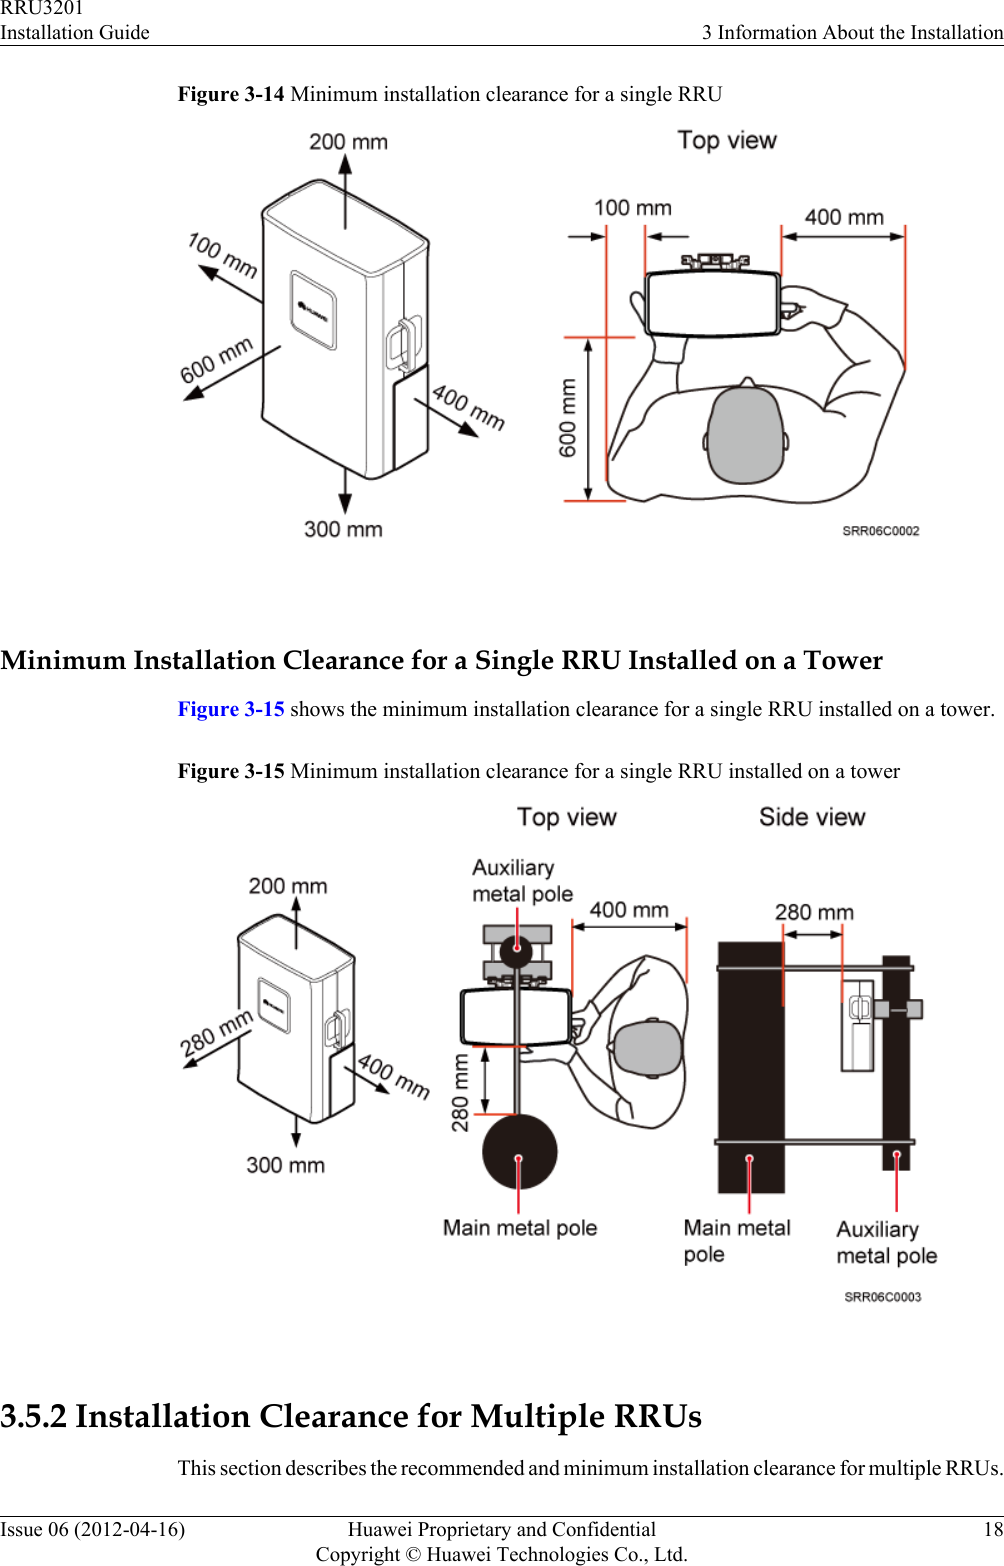 Figure 3-14 Minimum installation clearance for a single RRU Minimum Installation Clearance for a Single RRU Installed on a TowerFigure 3-15 shows the minimum installation clearance for a single RRU installed on a tower.Figure 3-15 Minimum installation clearance for a single RRU installed on a tower 3.5.2 Installation Clearance for Multiple RRUsThis section describes the recommended and minimum installation clearance for multiple RRUs.RRU3201Installation Guide 3 Information About the InstallationIssue 06 (2012-04-16) Huawei Proprietary and ConfidentialCopyright © Huawei Technologies Co., Ltd.18